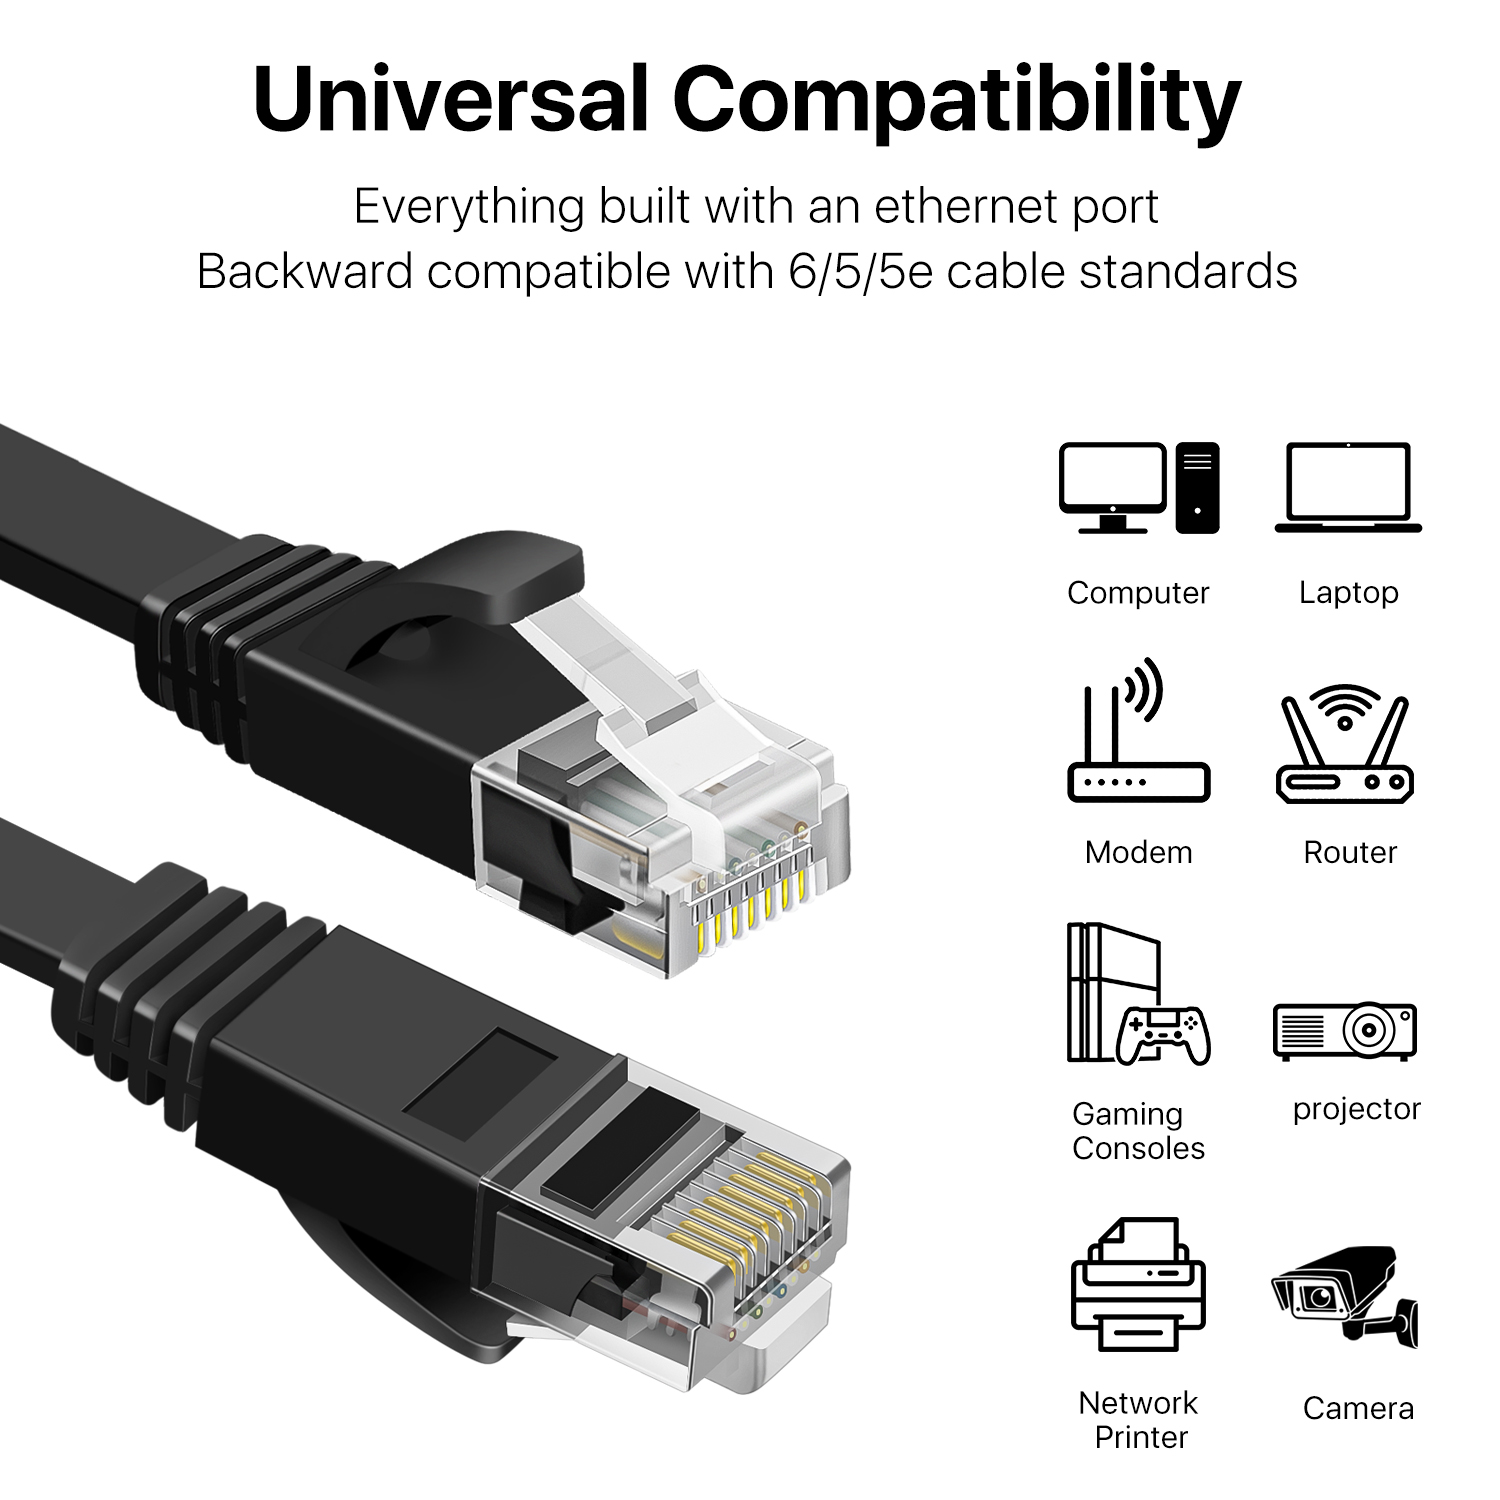 Reliable Speed & Connectivity - This 10 Ft Cat6 Ethernet cable provides exceptional transmission performance and low signal losses. It supports up to 550 MHz and 10-Gigabit Ethernet.